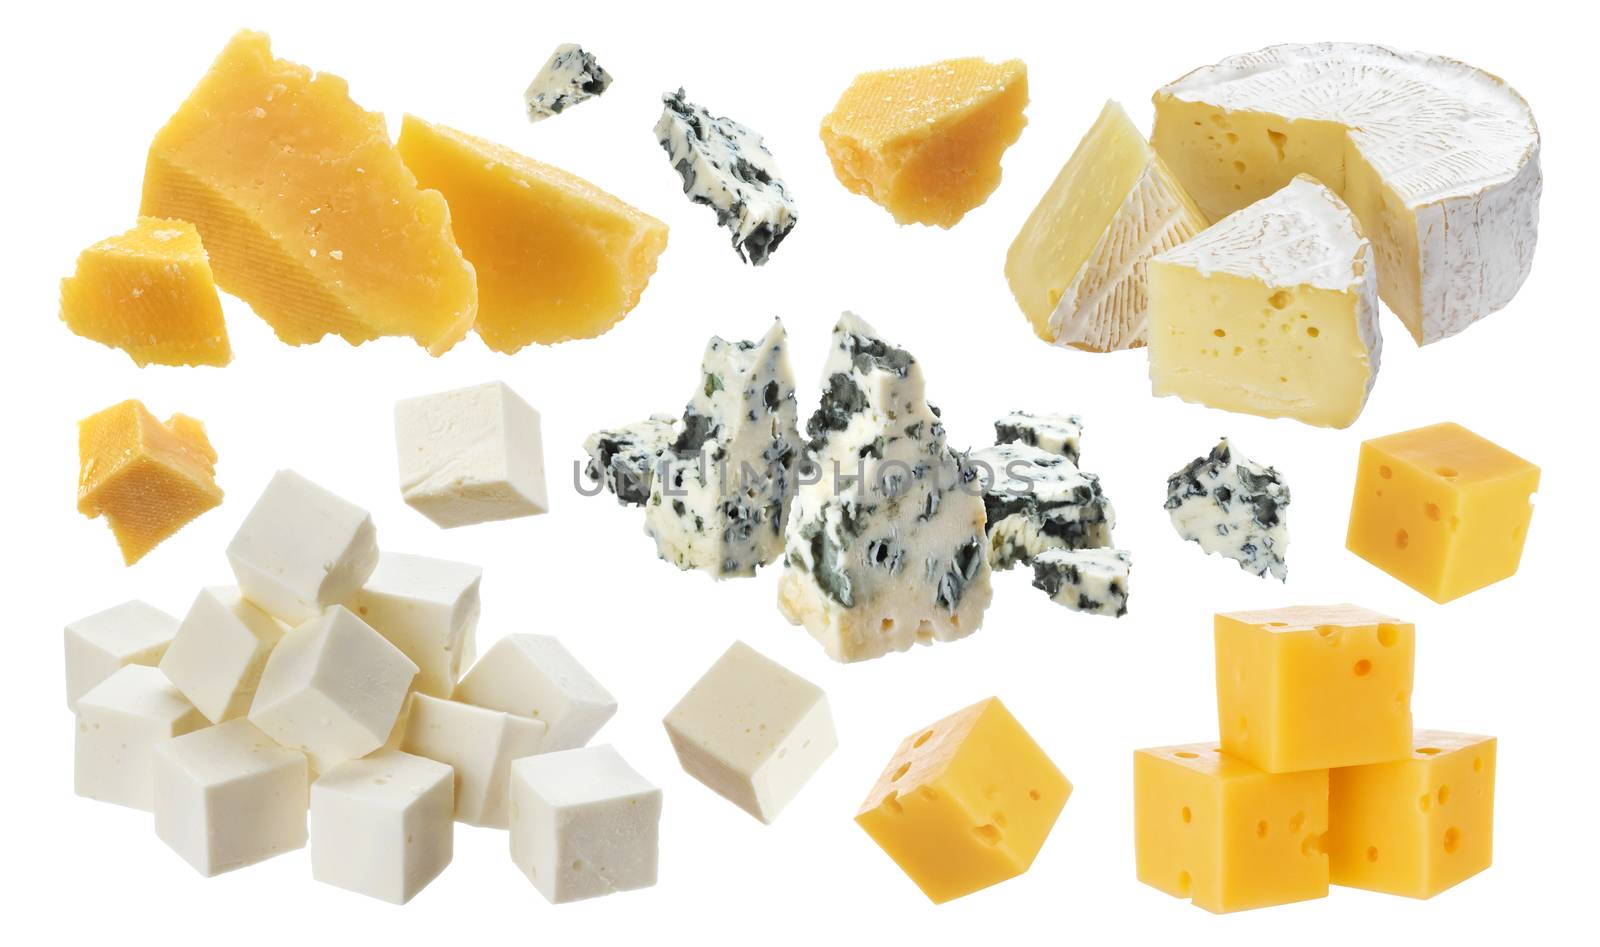 Different pieces of cheese. Cheddar, parmesan, emmental, blu cheese, camembert, feta isolated on white background with clipping path